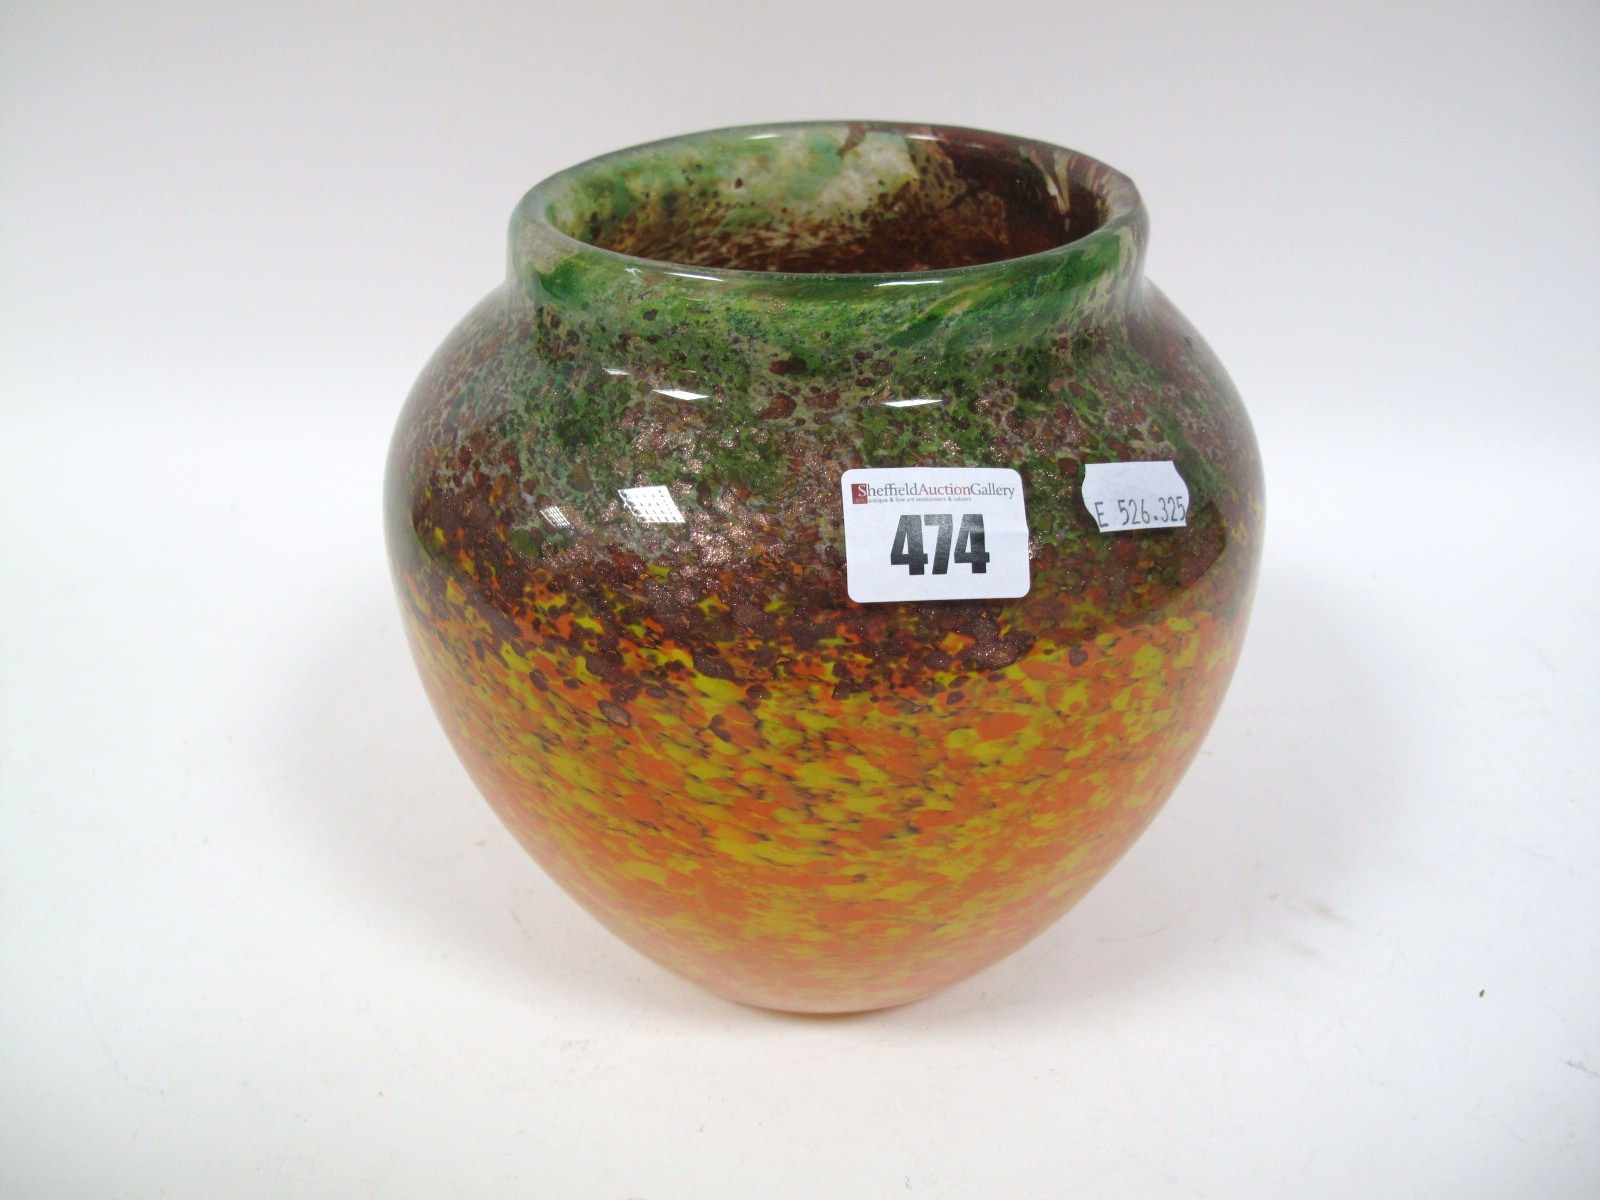 A Size VI Shape A.395 Vase, orange and yellow mottled with aventurine, green and red border, paper